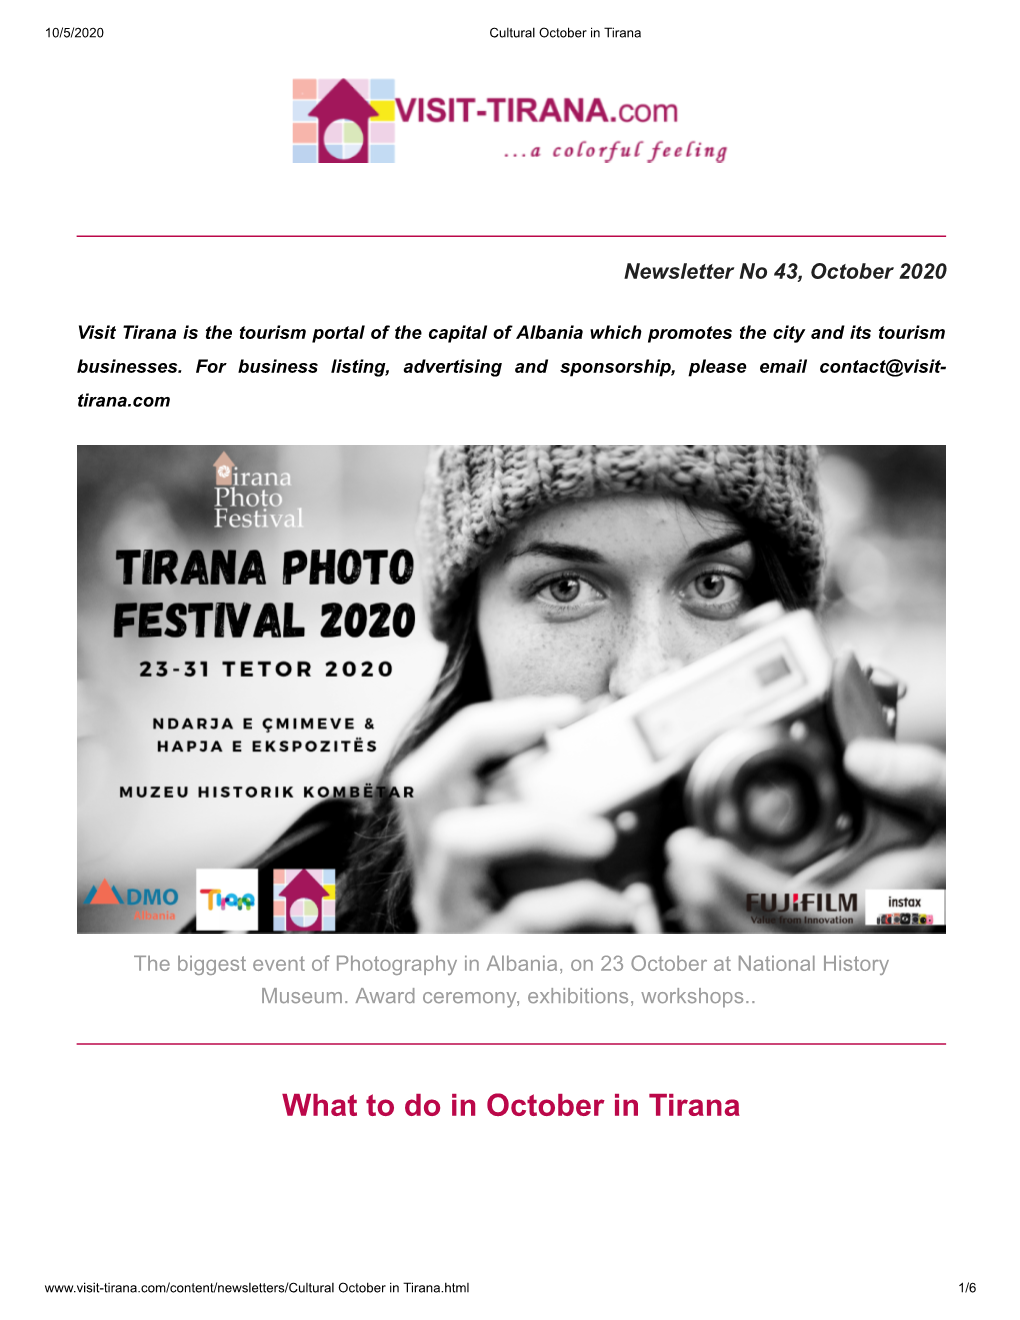 What to Do in October in Tirana